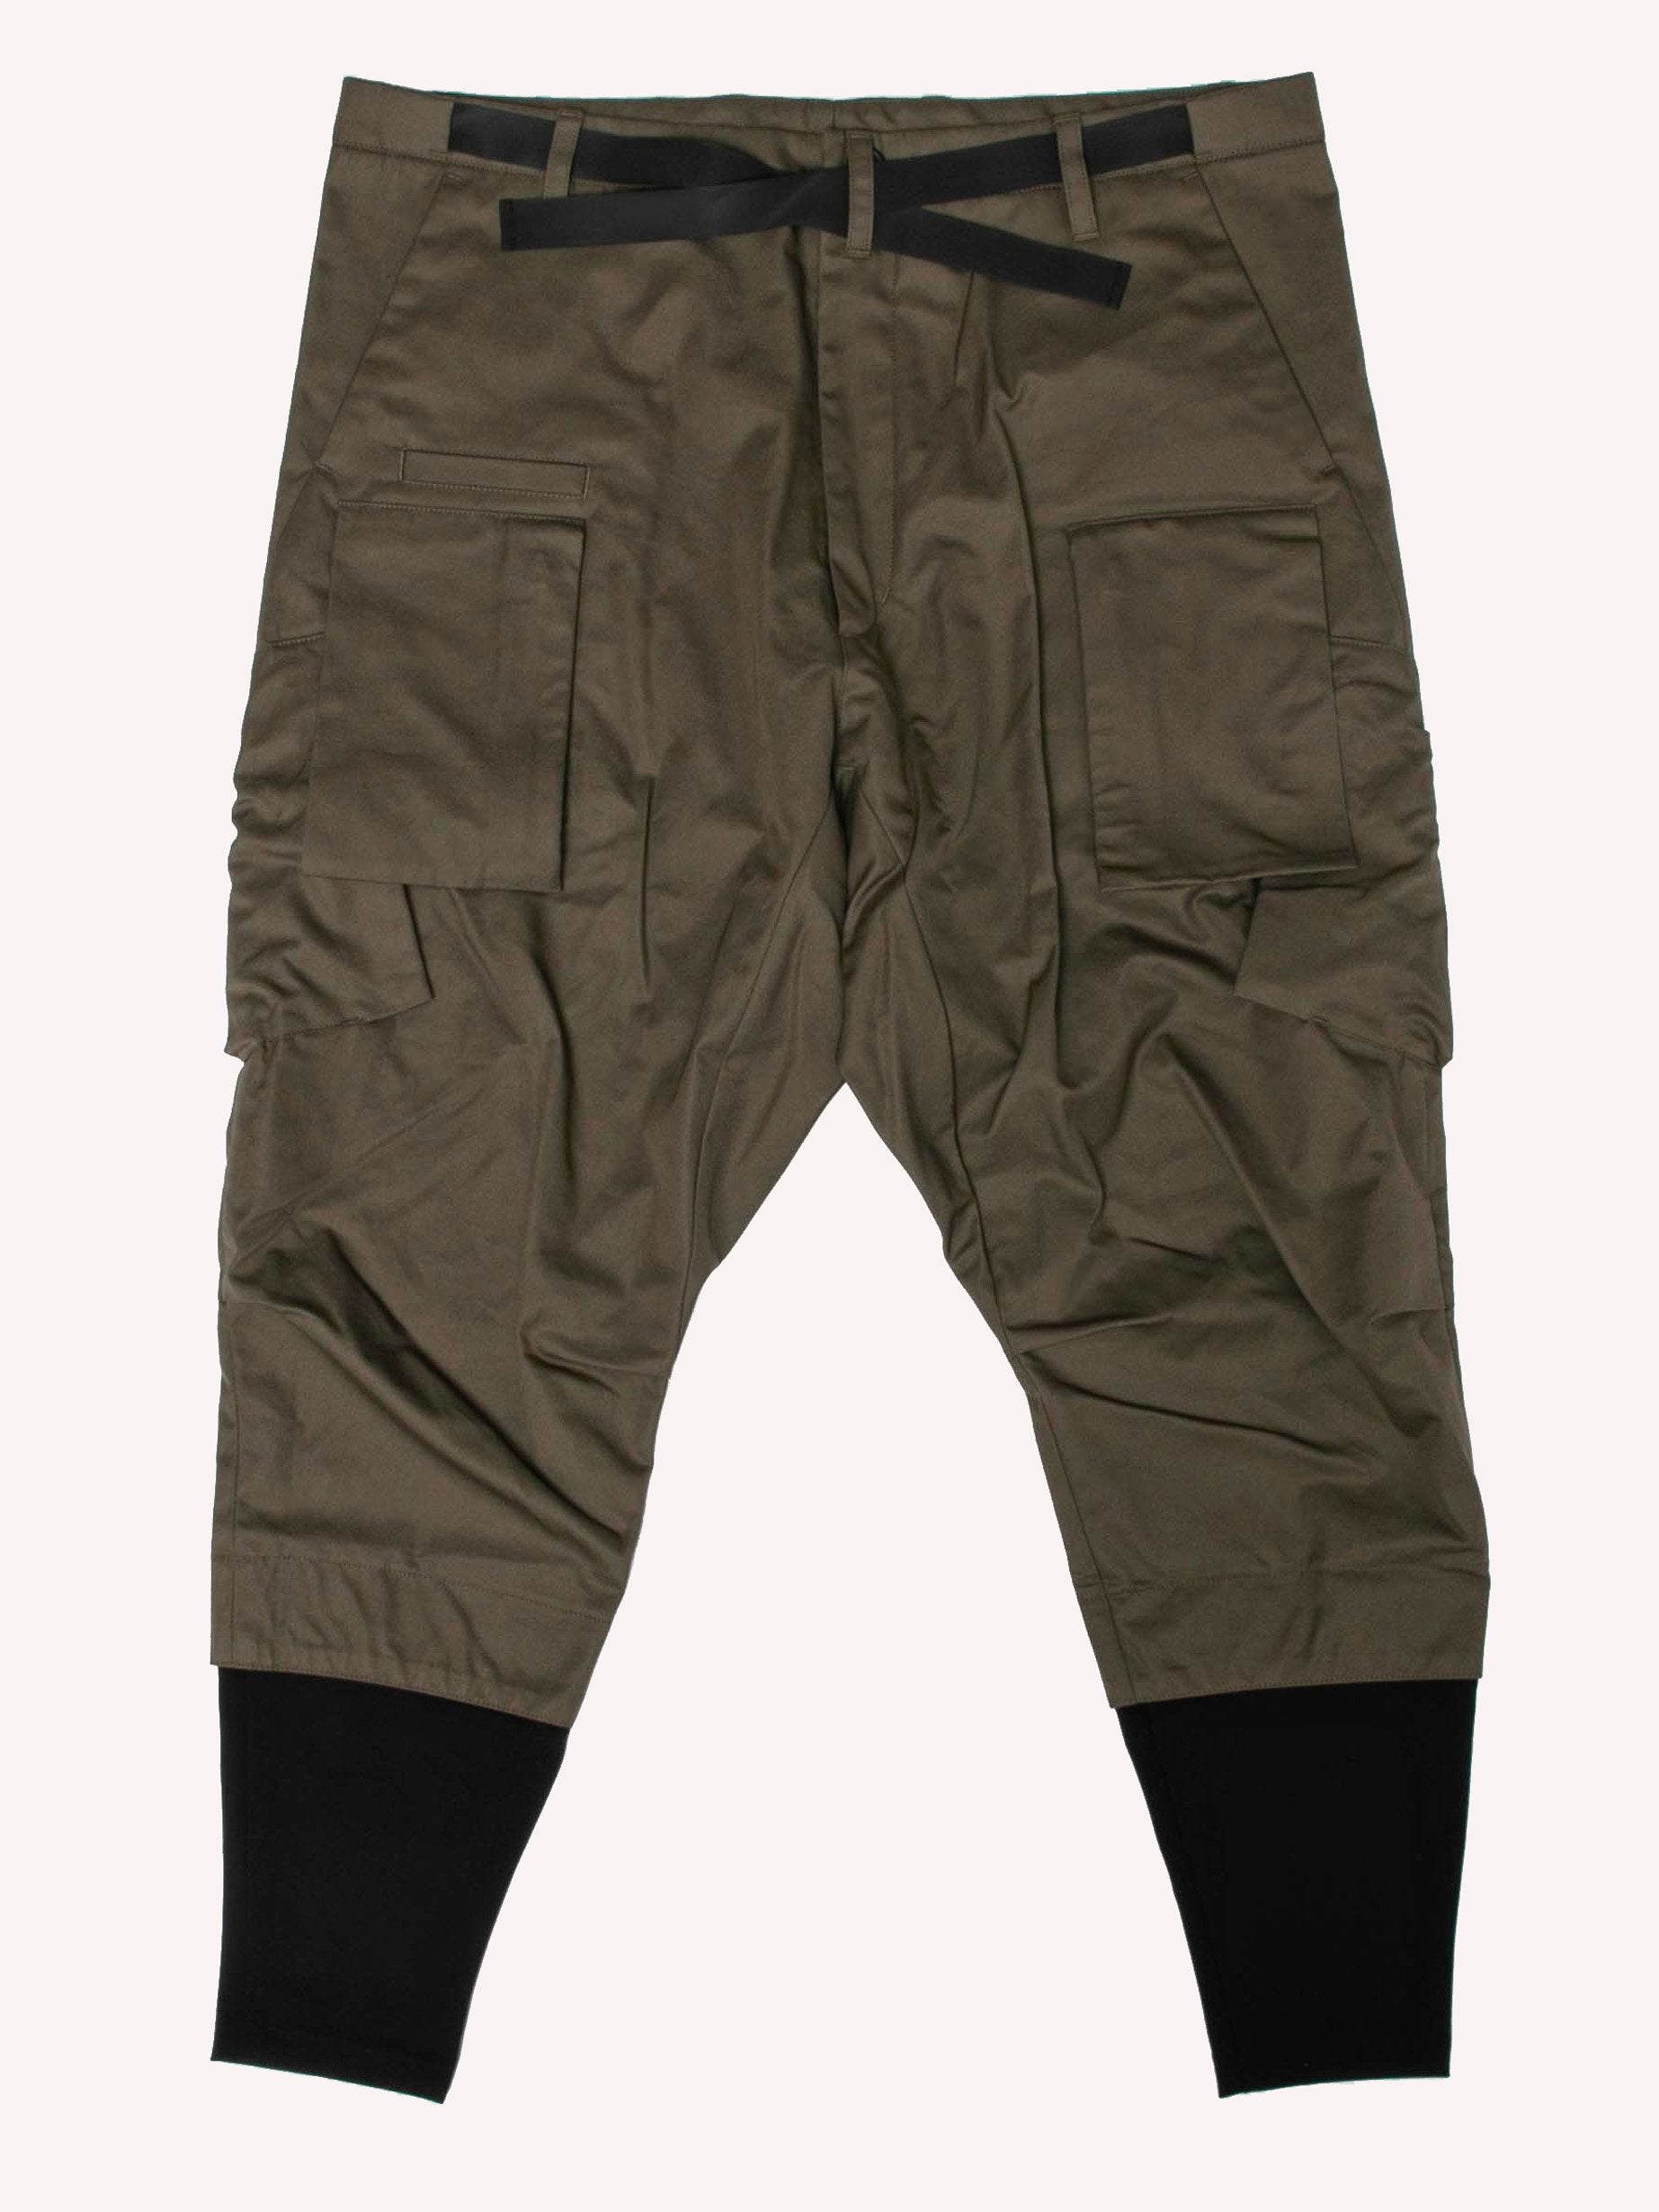 Buy Acronym Cargo Drawcord Trouser P23a S Online At Union Los Angeles